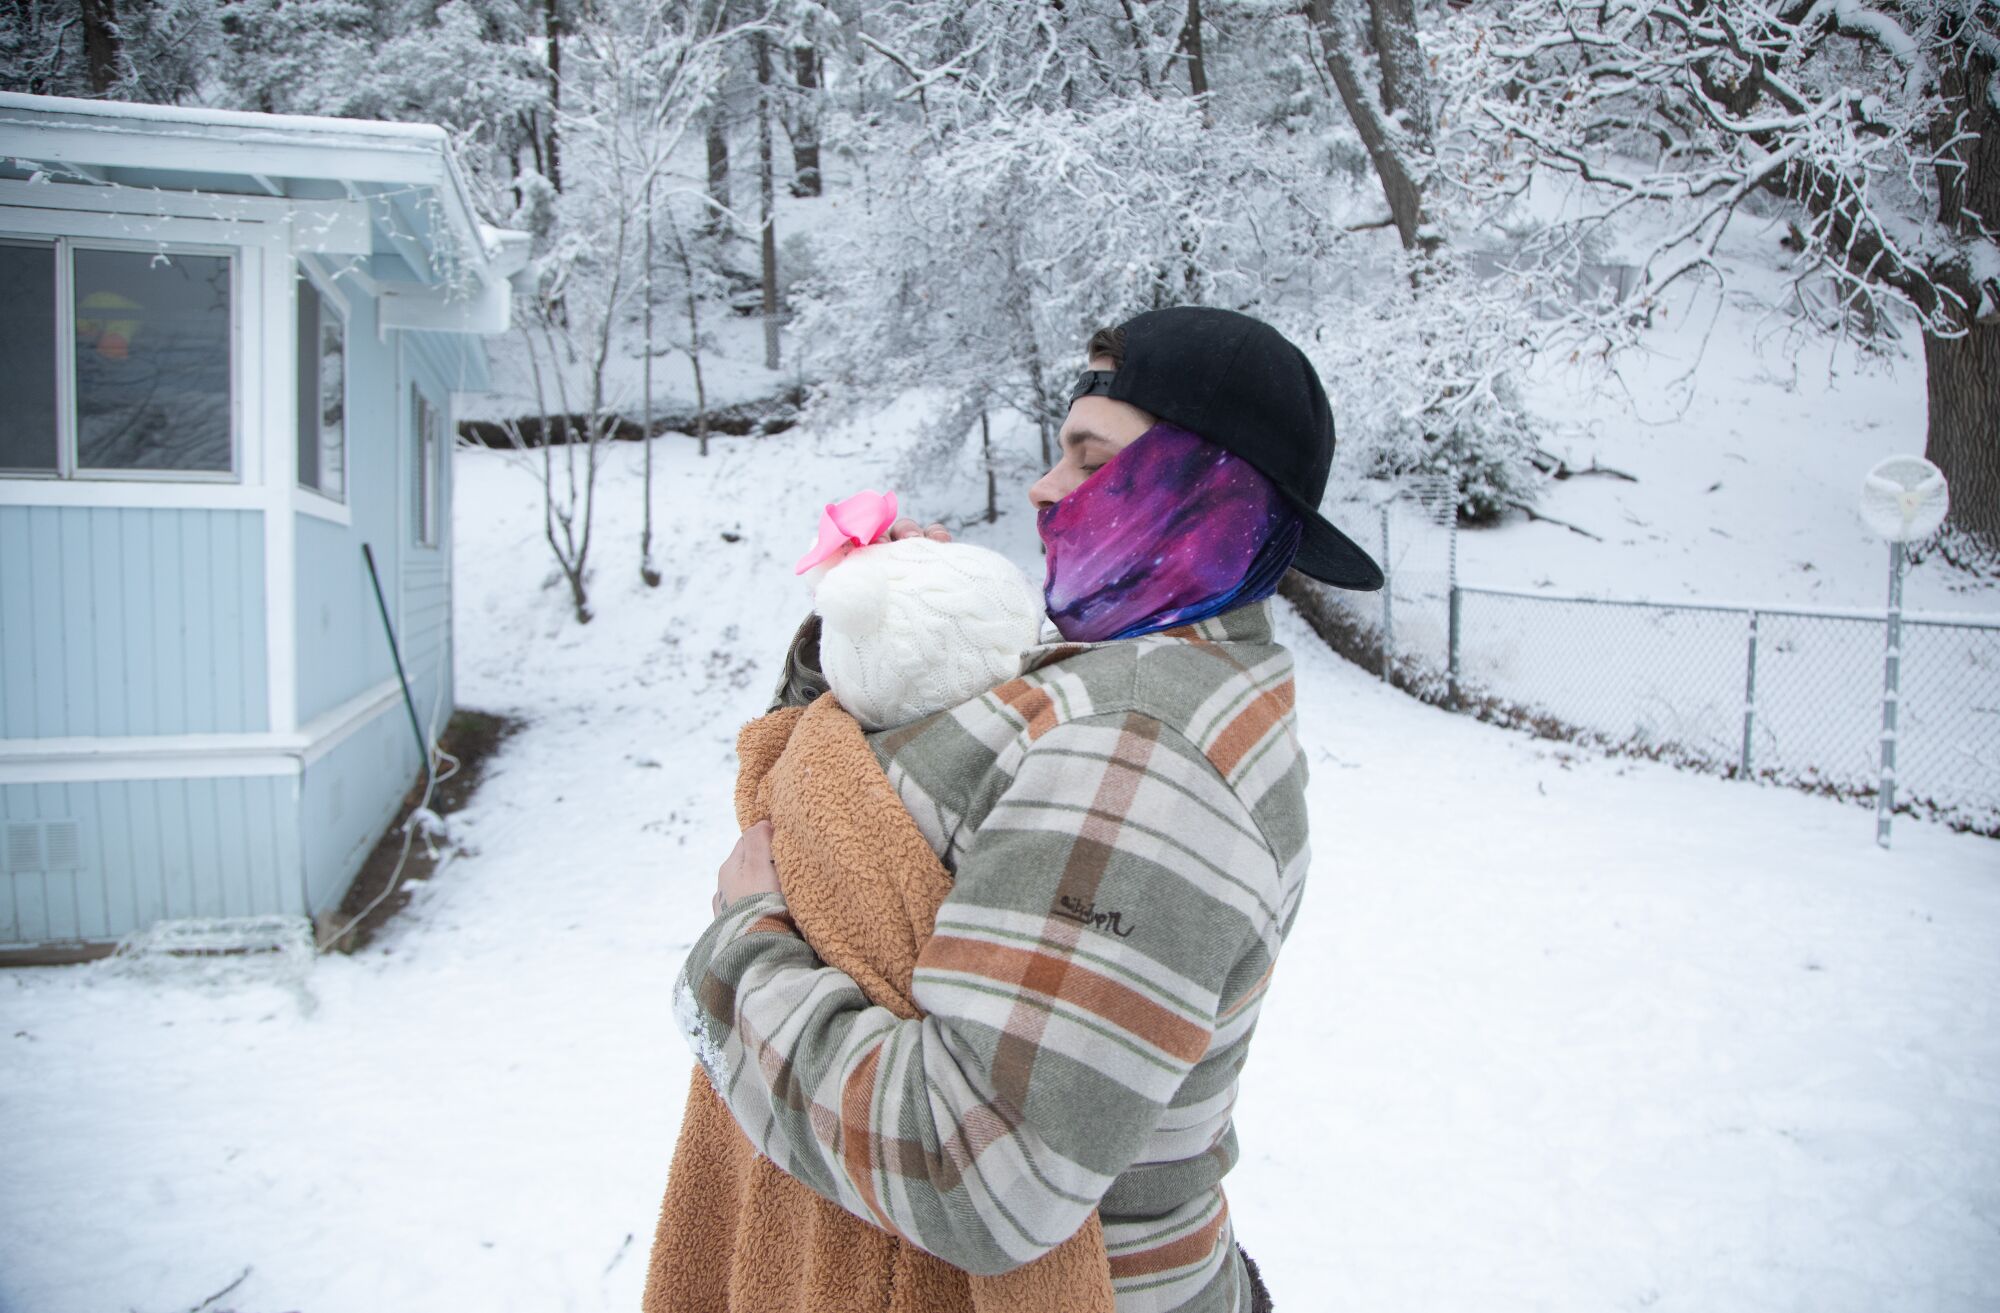 A man carries a baby, both bundled up against the cold, in a snowy yard